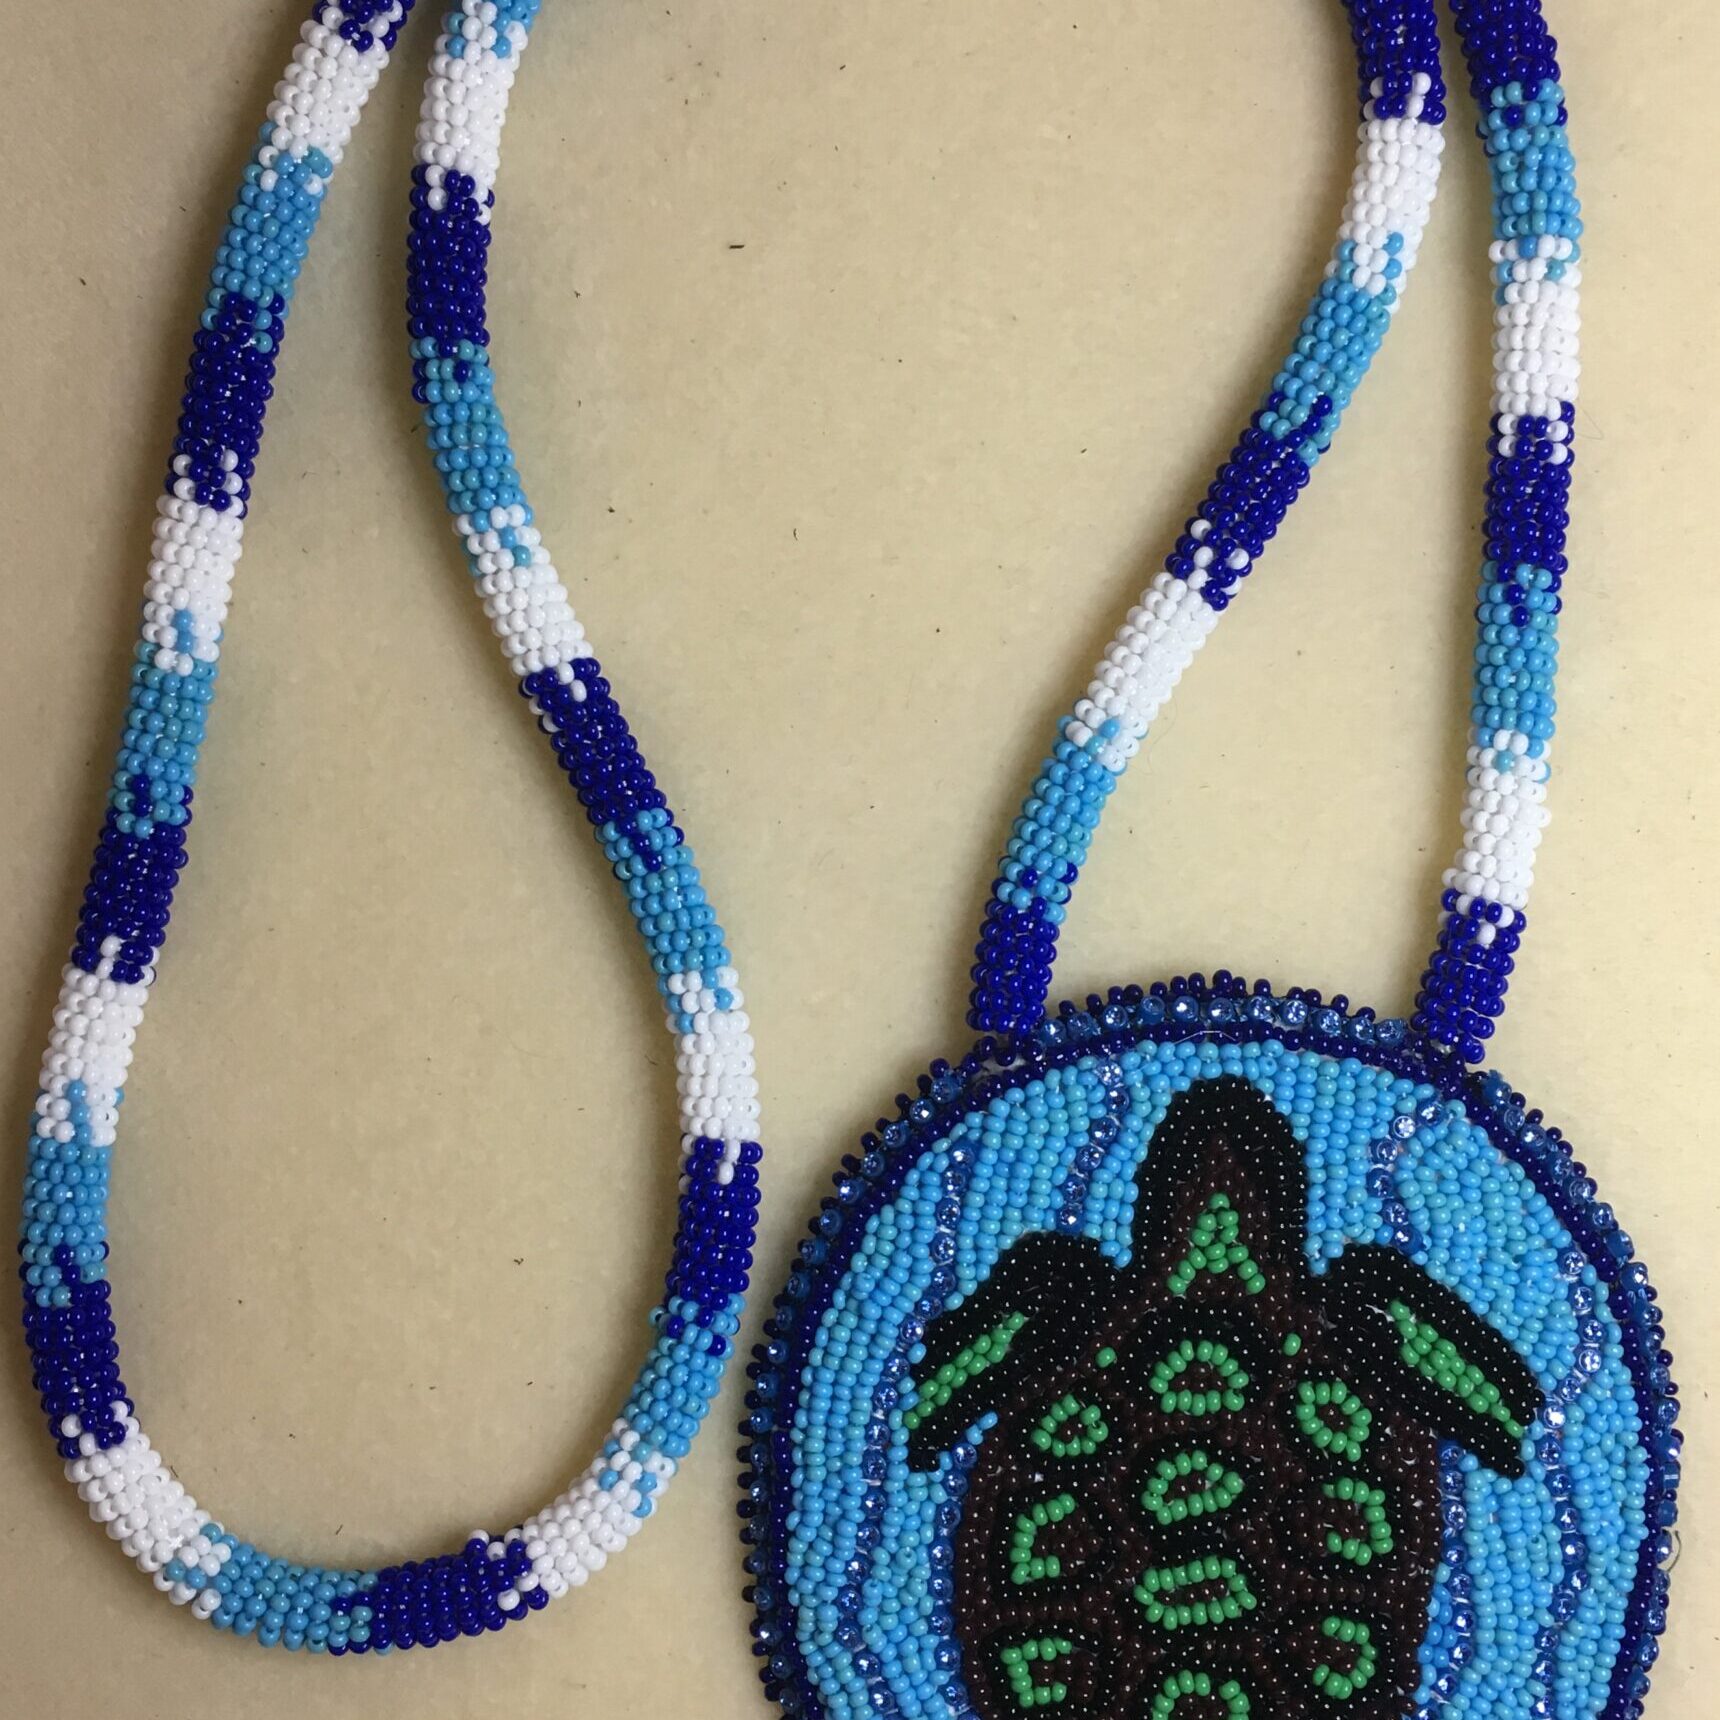 Michelle Goulet, Jewellery, beadwork, leatherwork, quilting, ribbon skirts, Indigenous Artist, First Nations, Indigenous Arts Collective of Canada, Pass The Feather